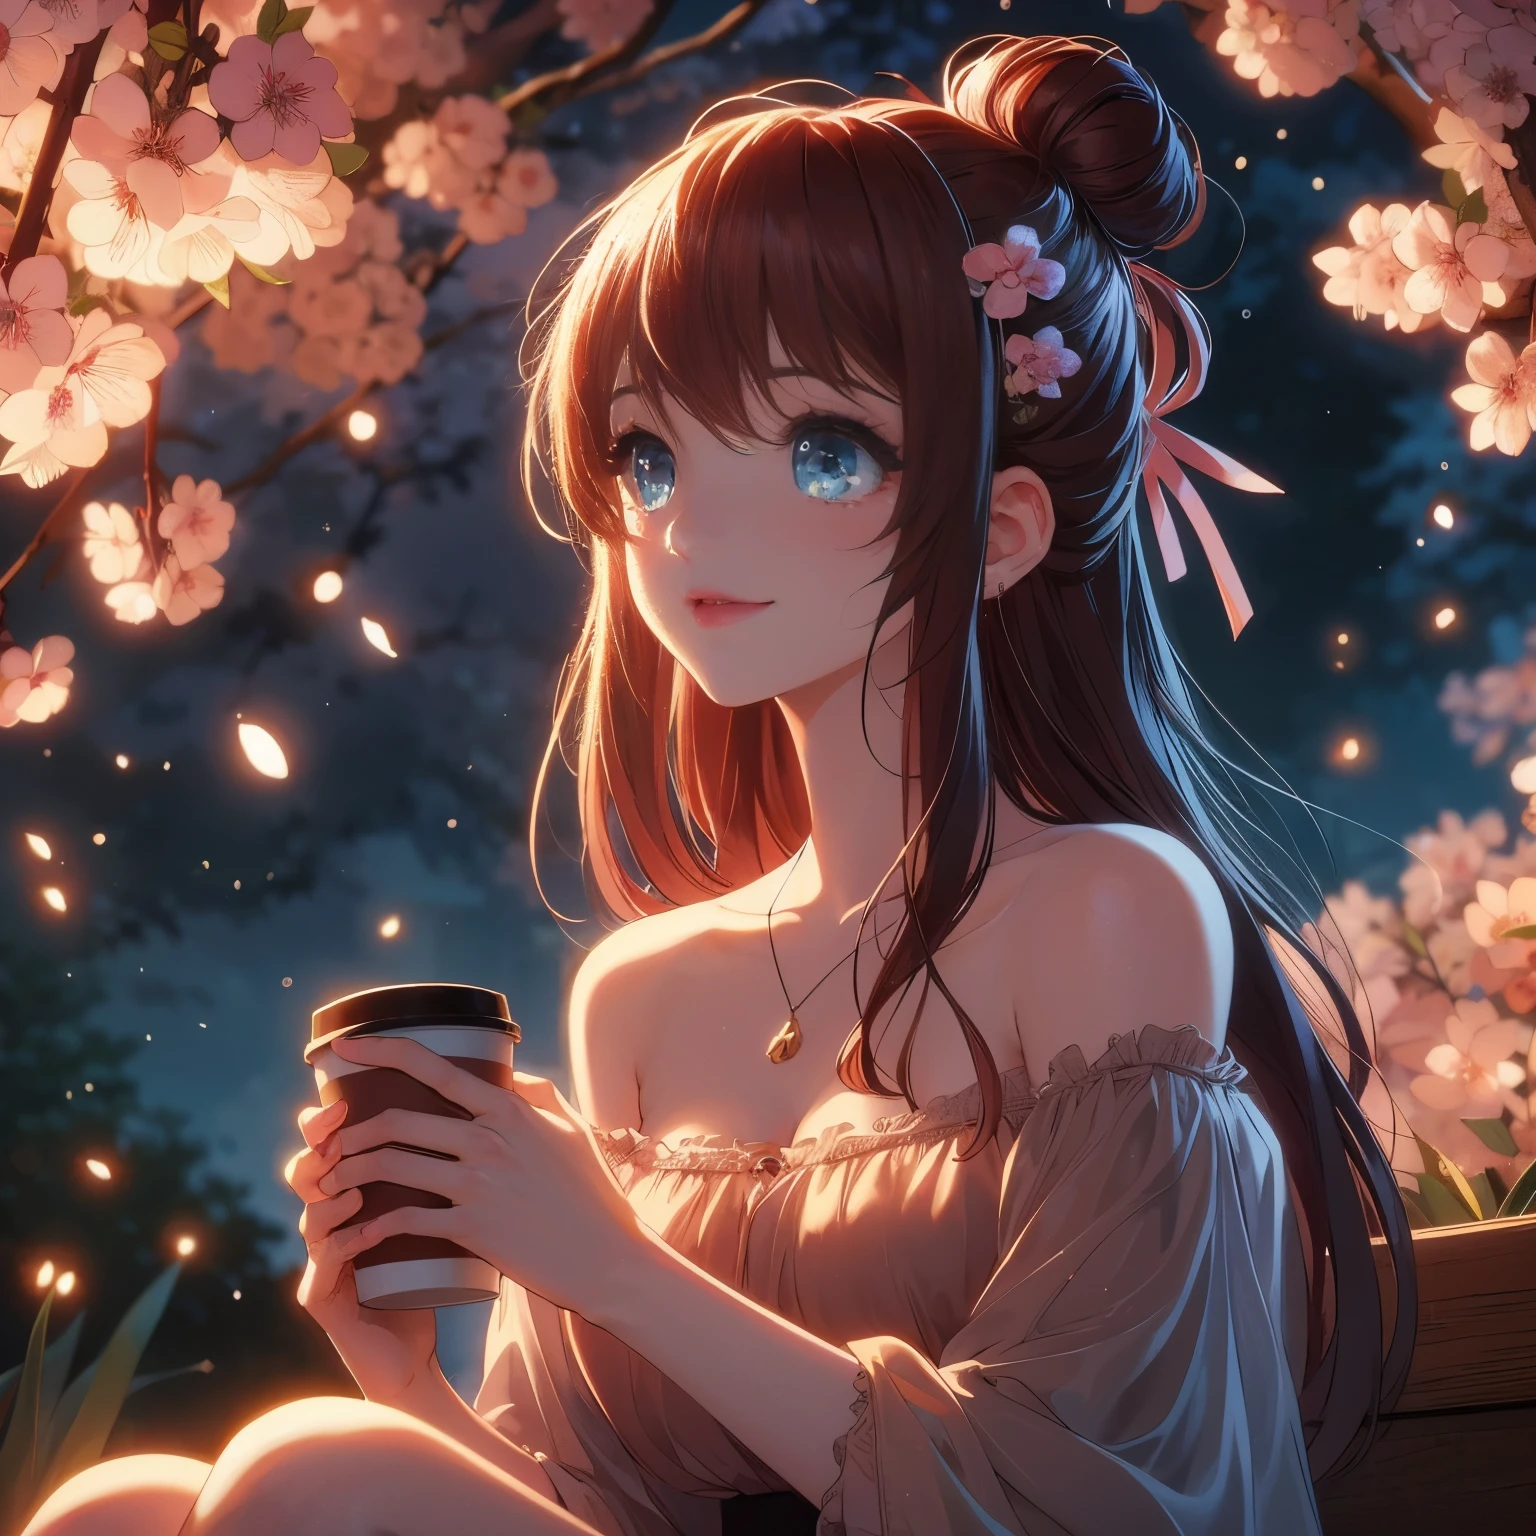 anime girl sitting on a bench with a cup of coffee, anime style 4 k, beautiful anime girl, anime wallpaper 4 k, anime wallpaper 4k, 4k anime wallpaper, beautiful anime portrait, anime art wallpaper 4 k, anime art wallpaper 4k, nightcore, pretty anime girl, beautiful anime, cute anime girl, anime art wallpaper 8 k, beautiful anime style